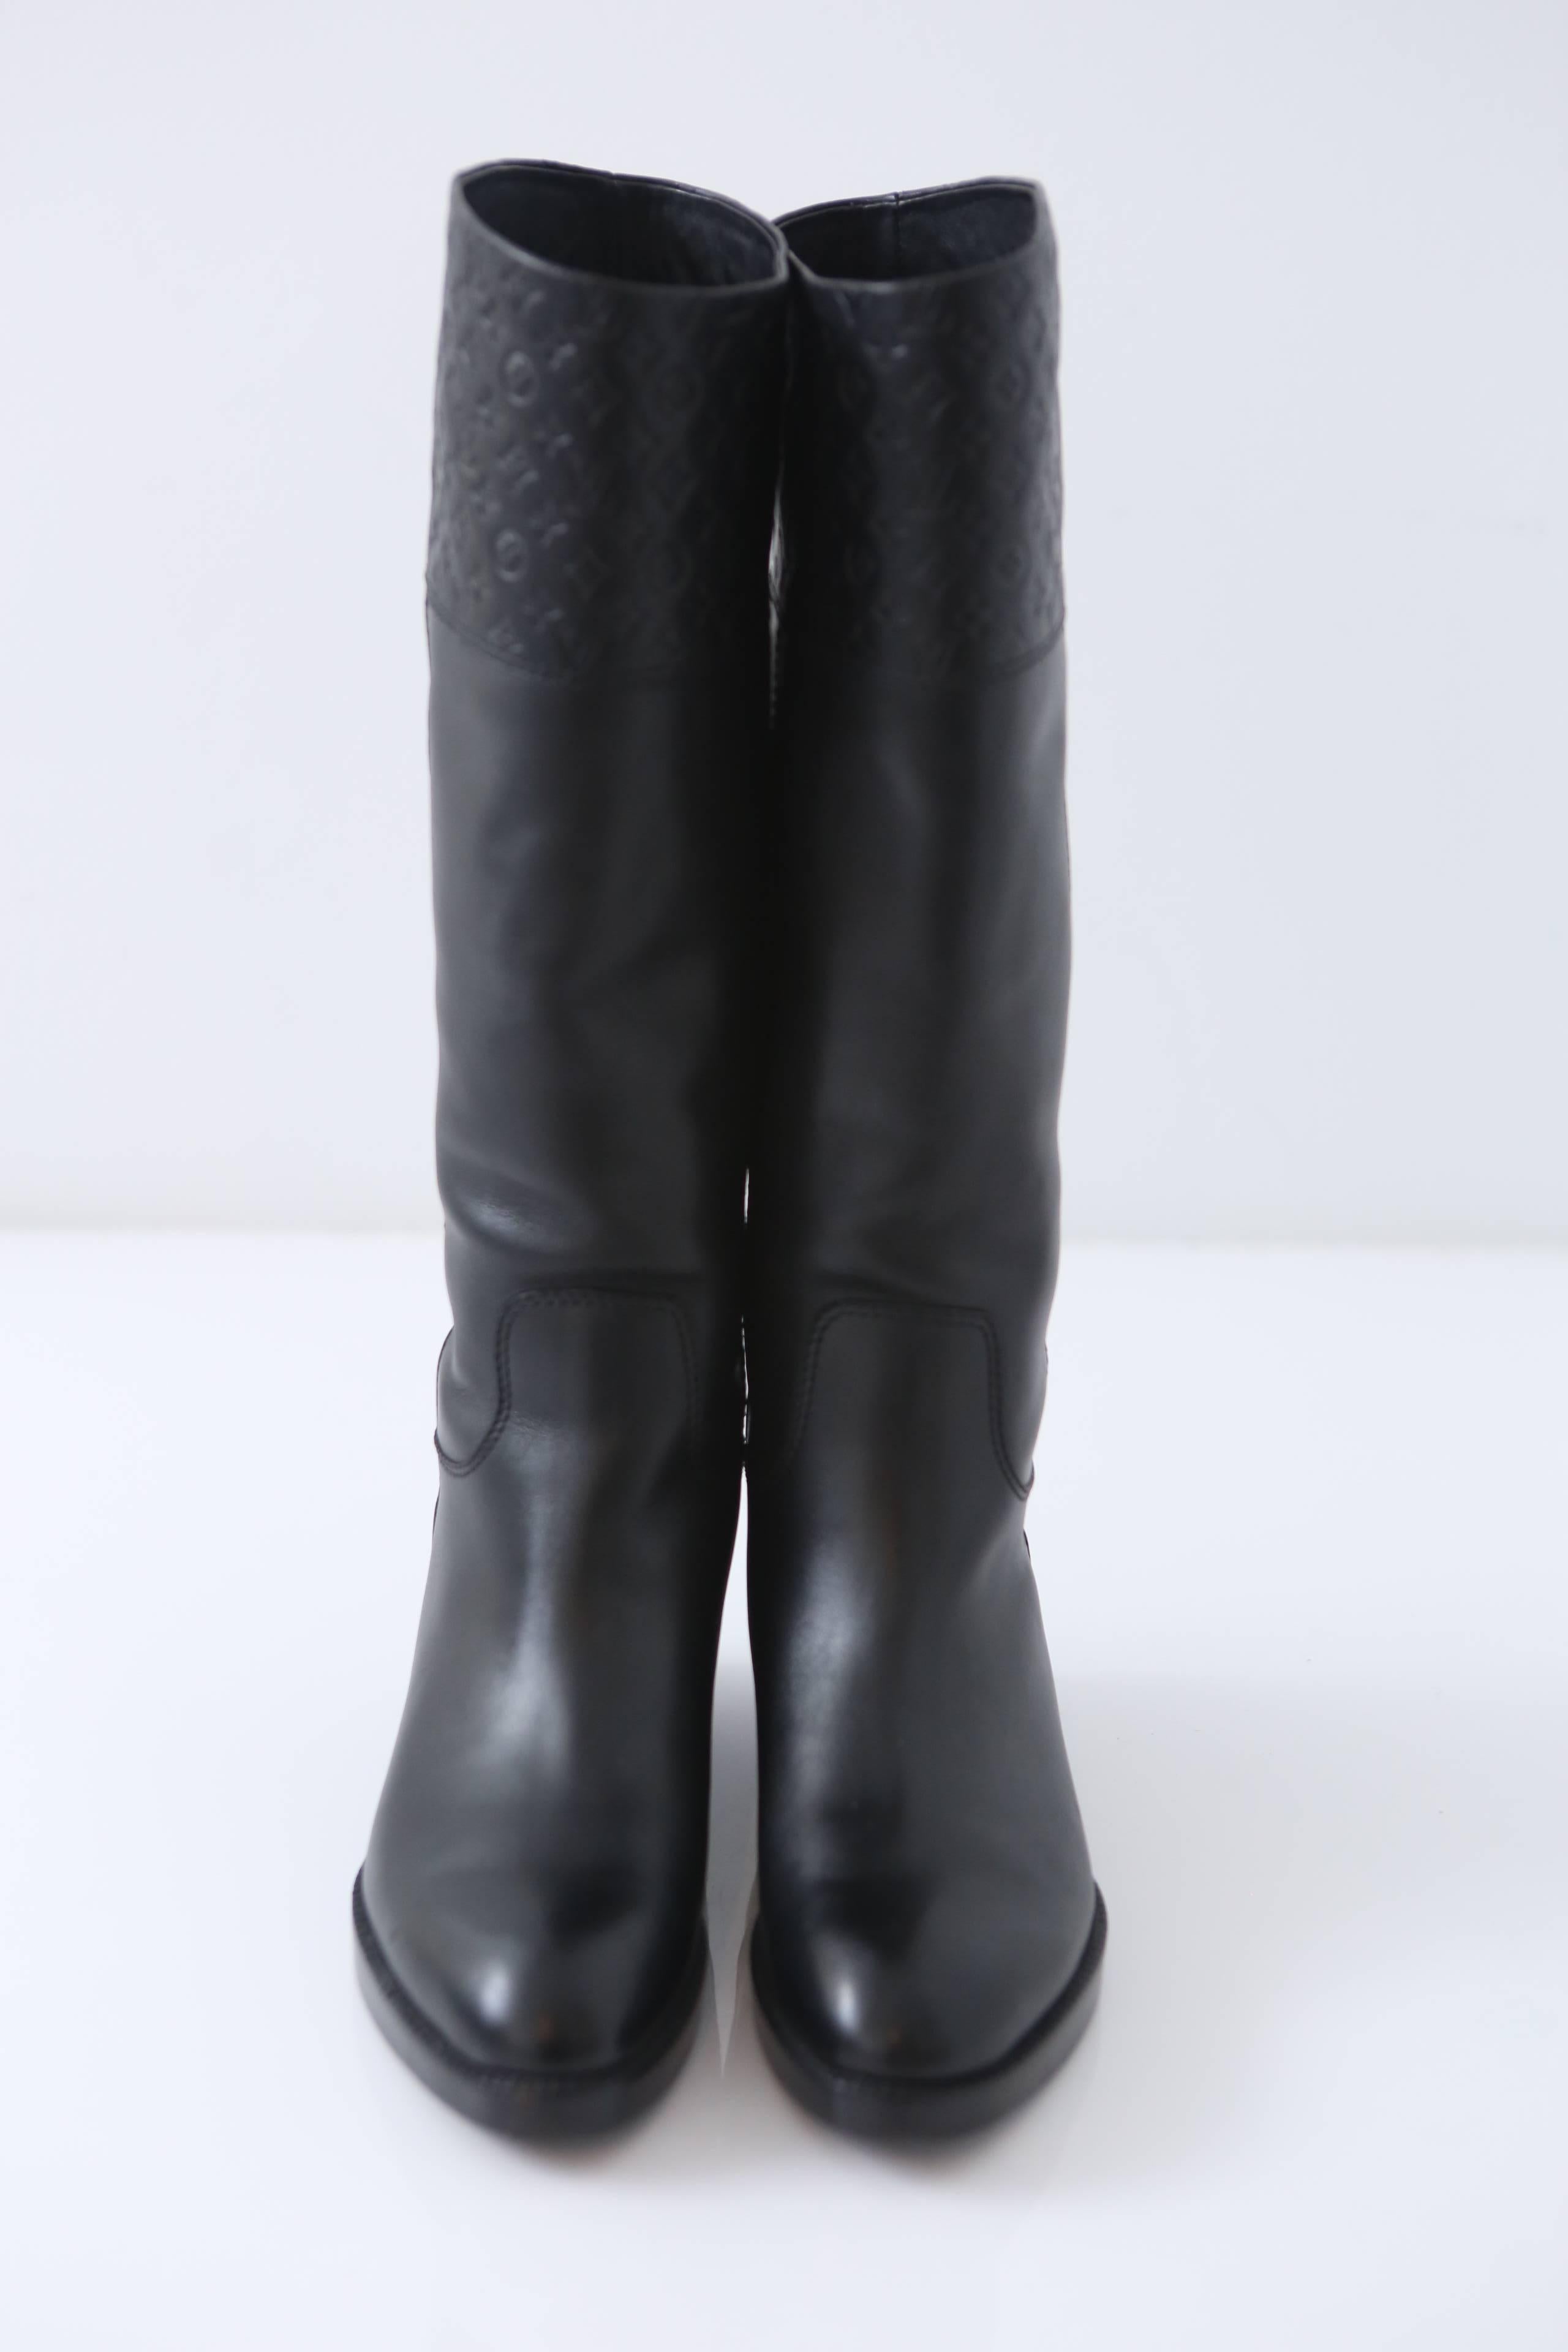 Louis Vuitton riding style boots with Embossed monogram pattern at top. 